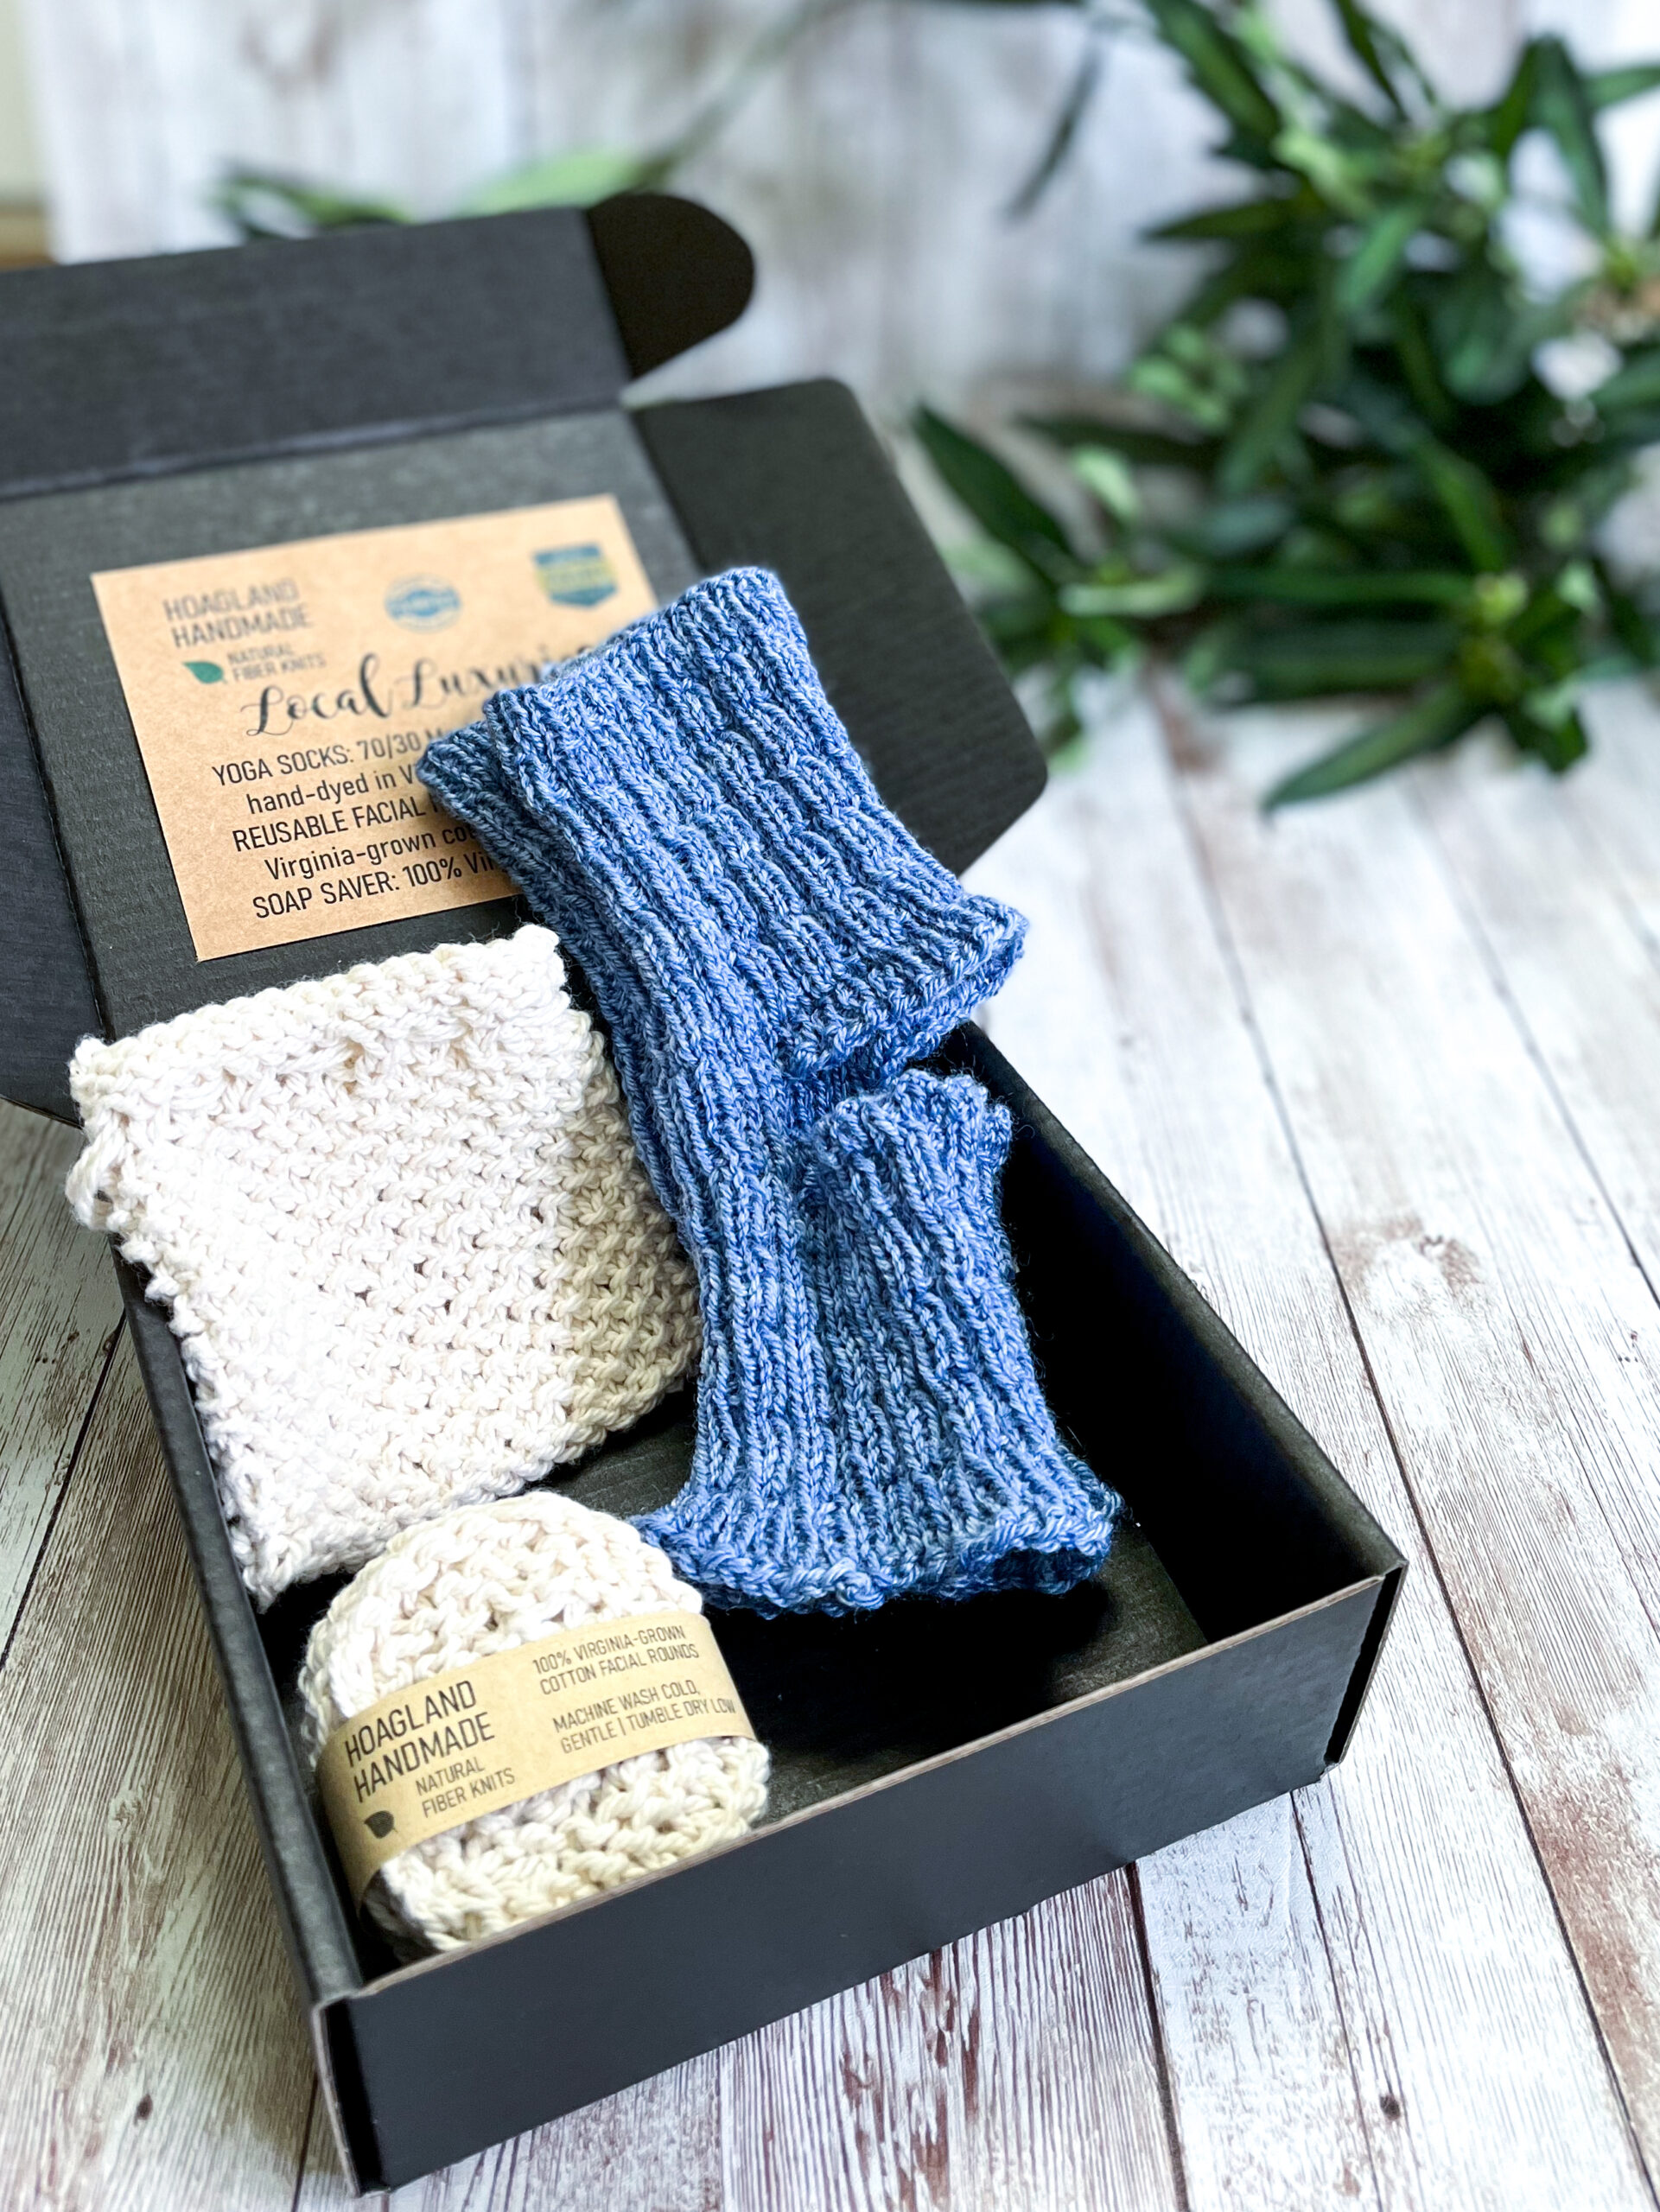 A black box contains a pair of hand-dyed merino/bamboo blue yoga socks, a Virginia-grown cotton soap saver and set of reusable facial rounds. The box sits on a wood panel with greenery in the background